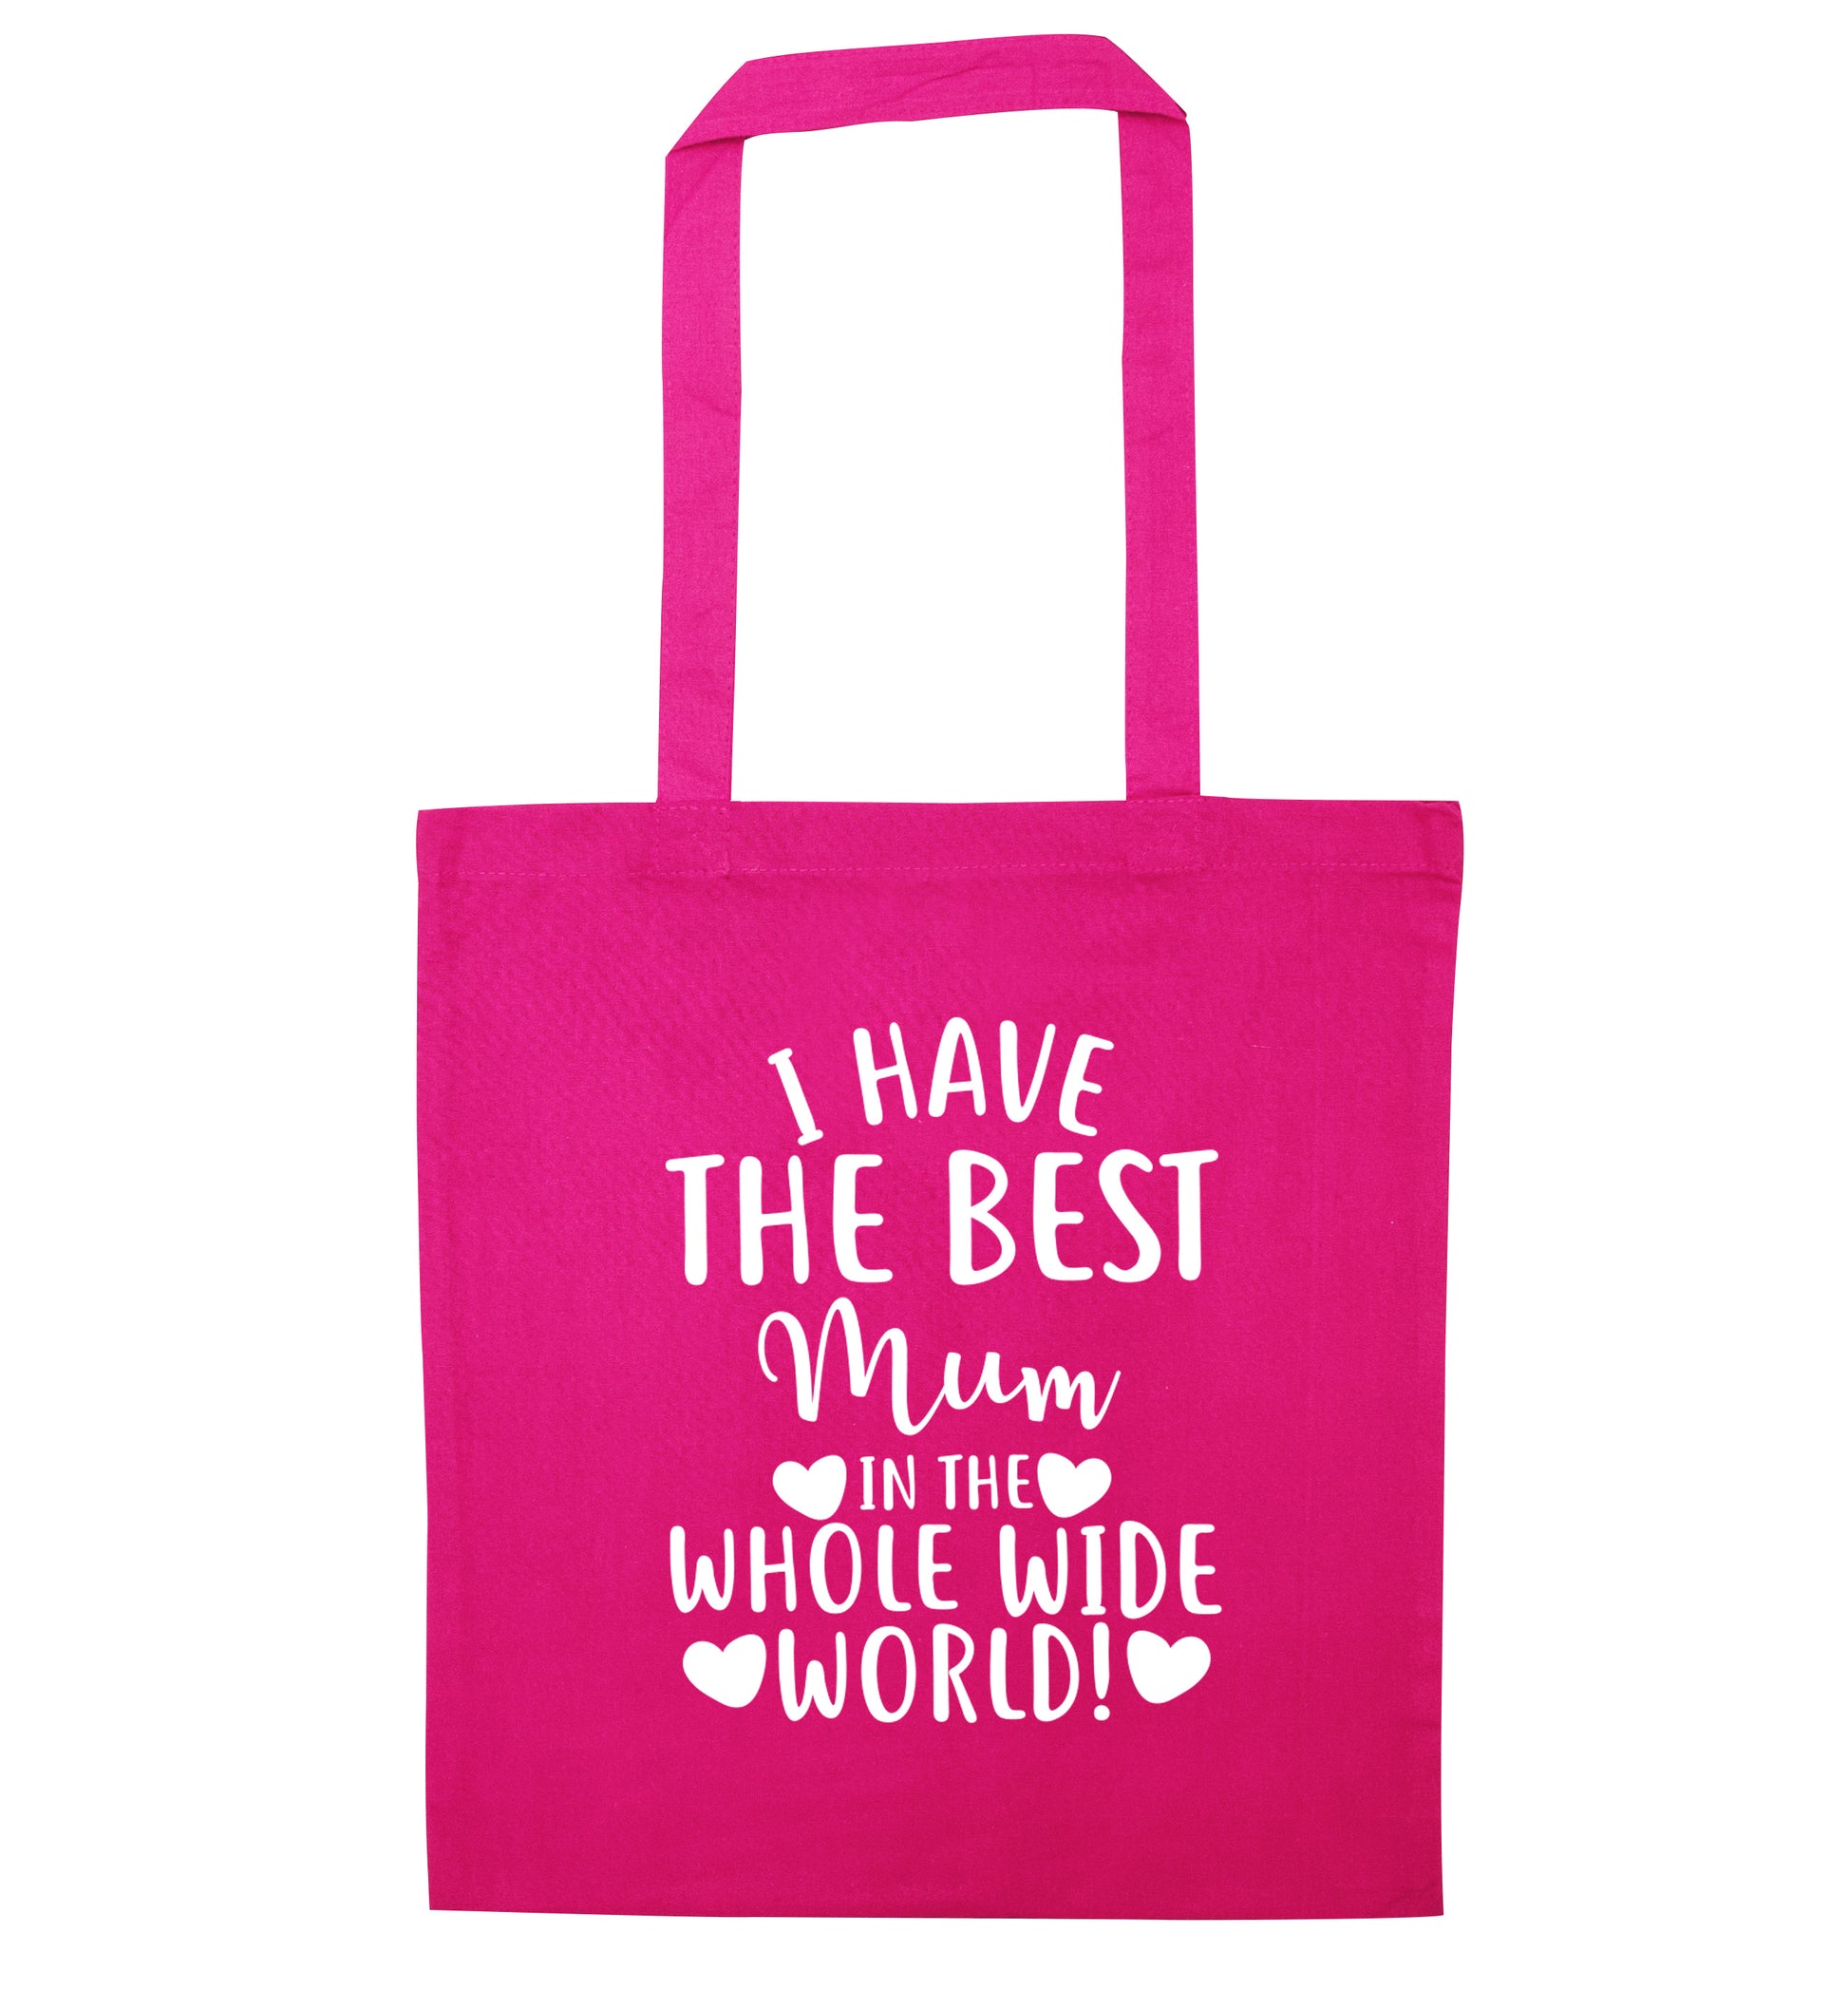 I have the best mum in the whole wide world! pink tote bag